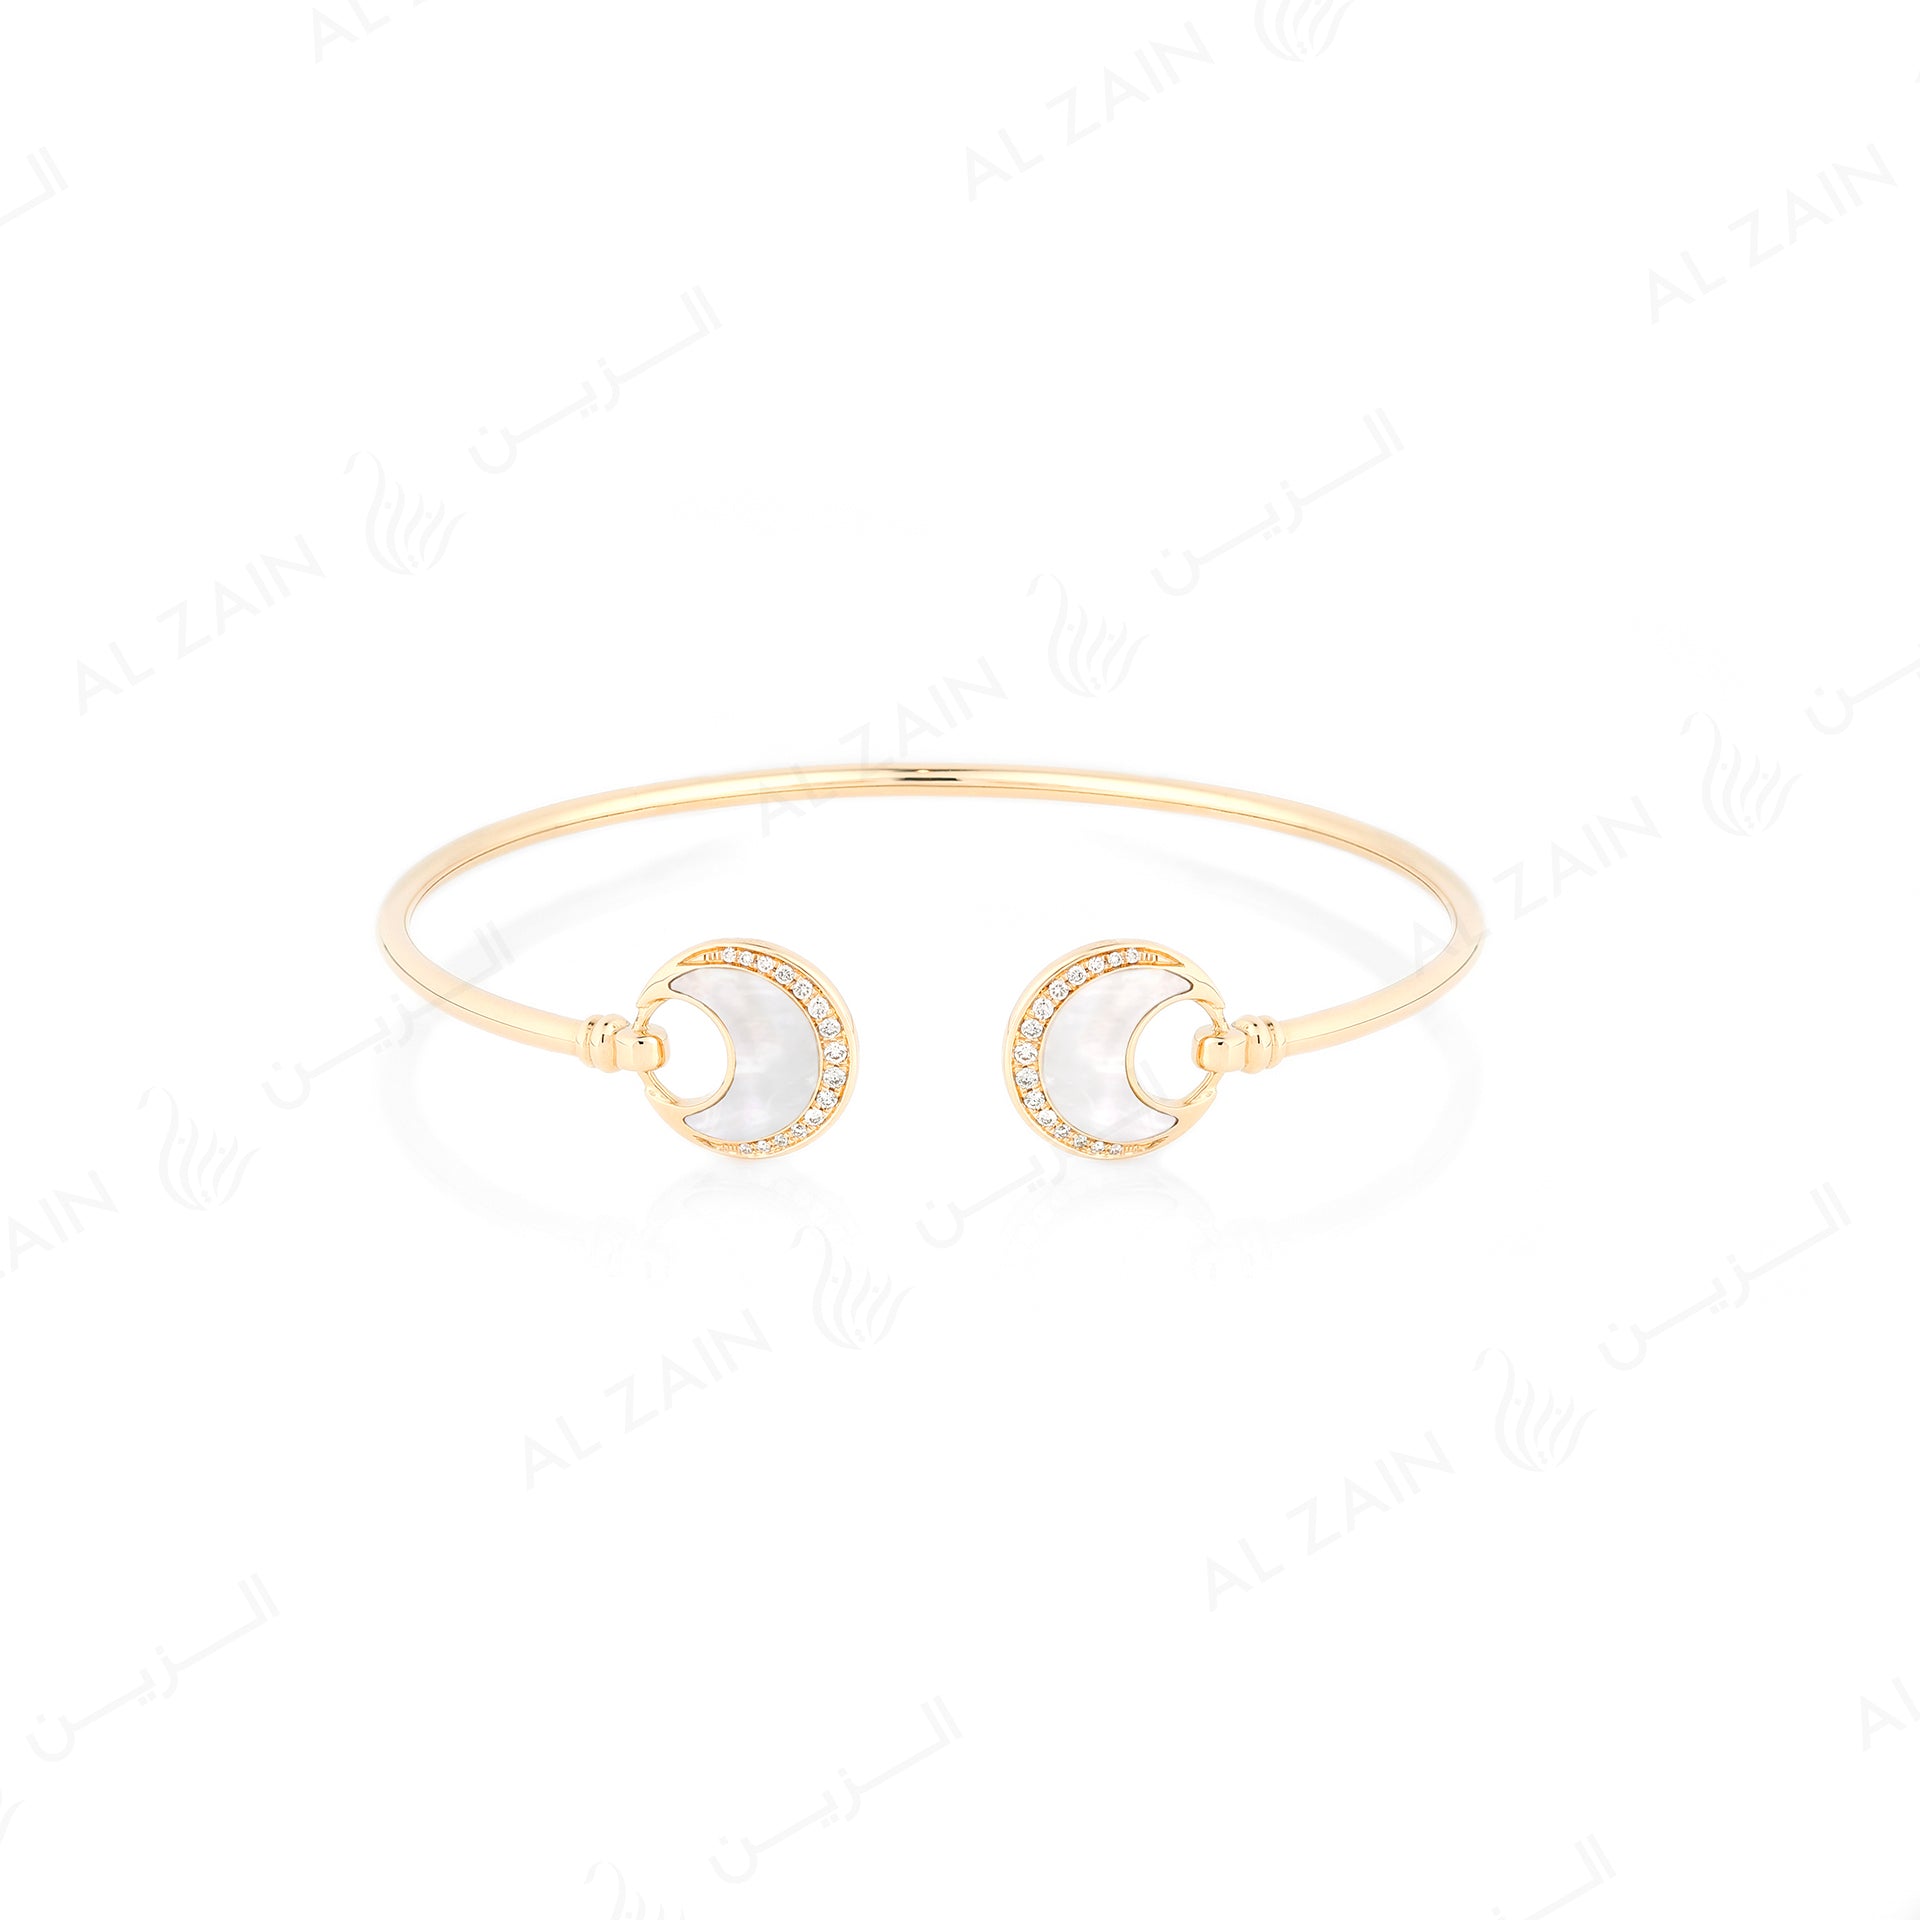 Al Hilal bangle in yellow gold with mother of pearl stone and diamonds